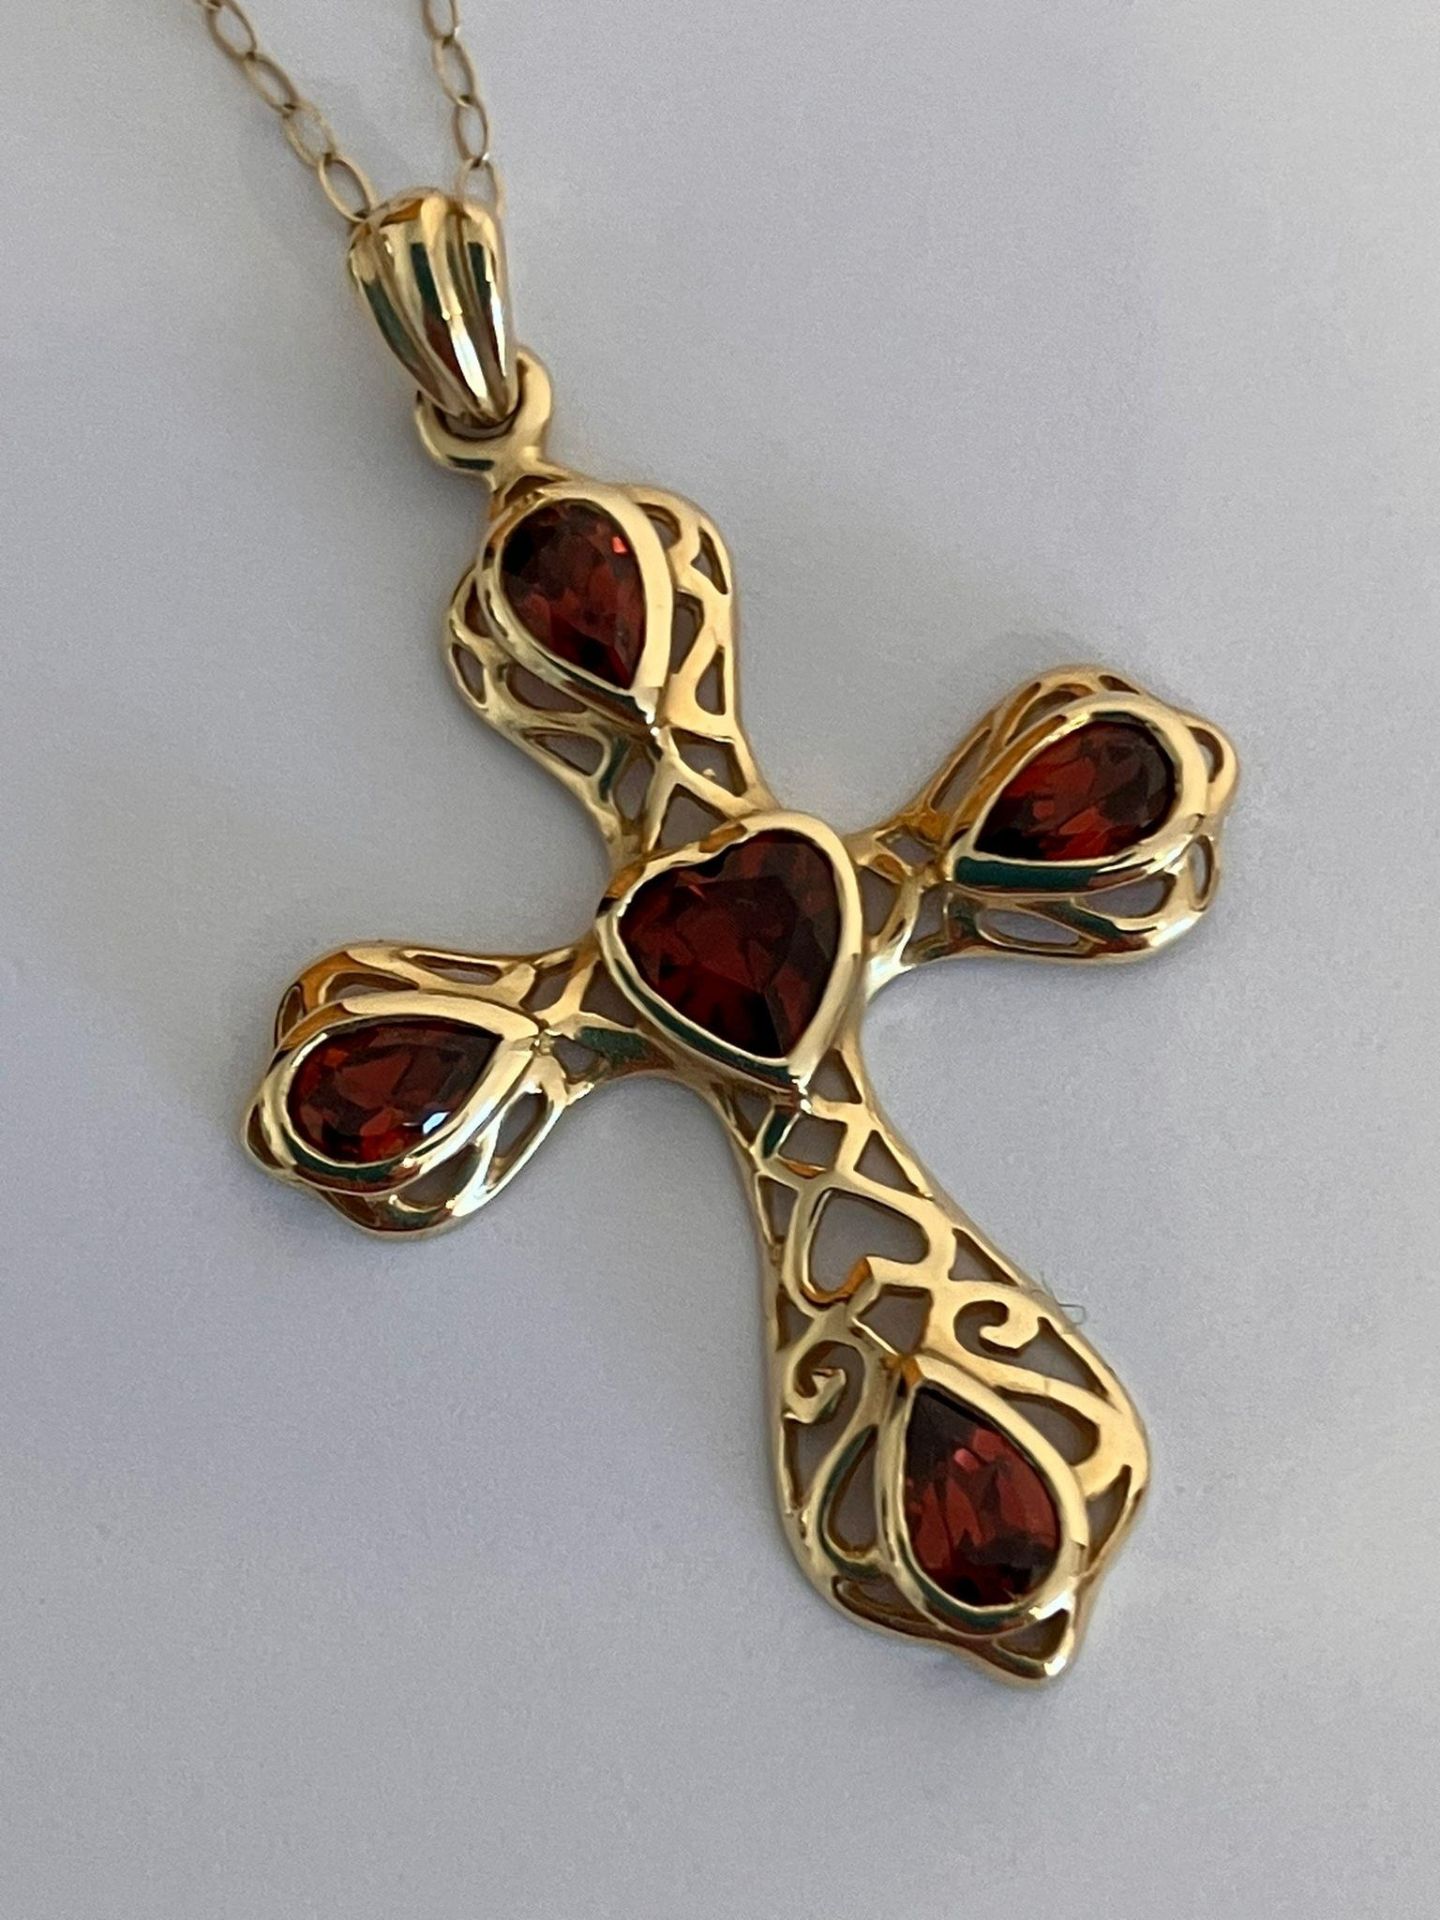 Stunning 9 carat GOLD and GARNET CROSS , mounted on a 9 carat GOLD CHAIN NECKLACE. GOLD CROSS - 3.